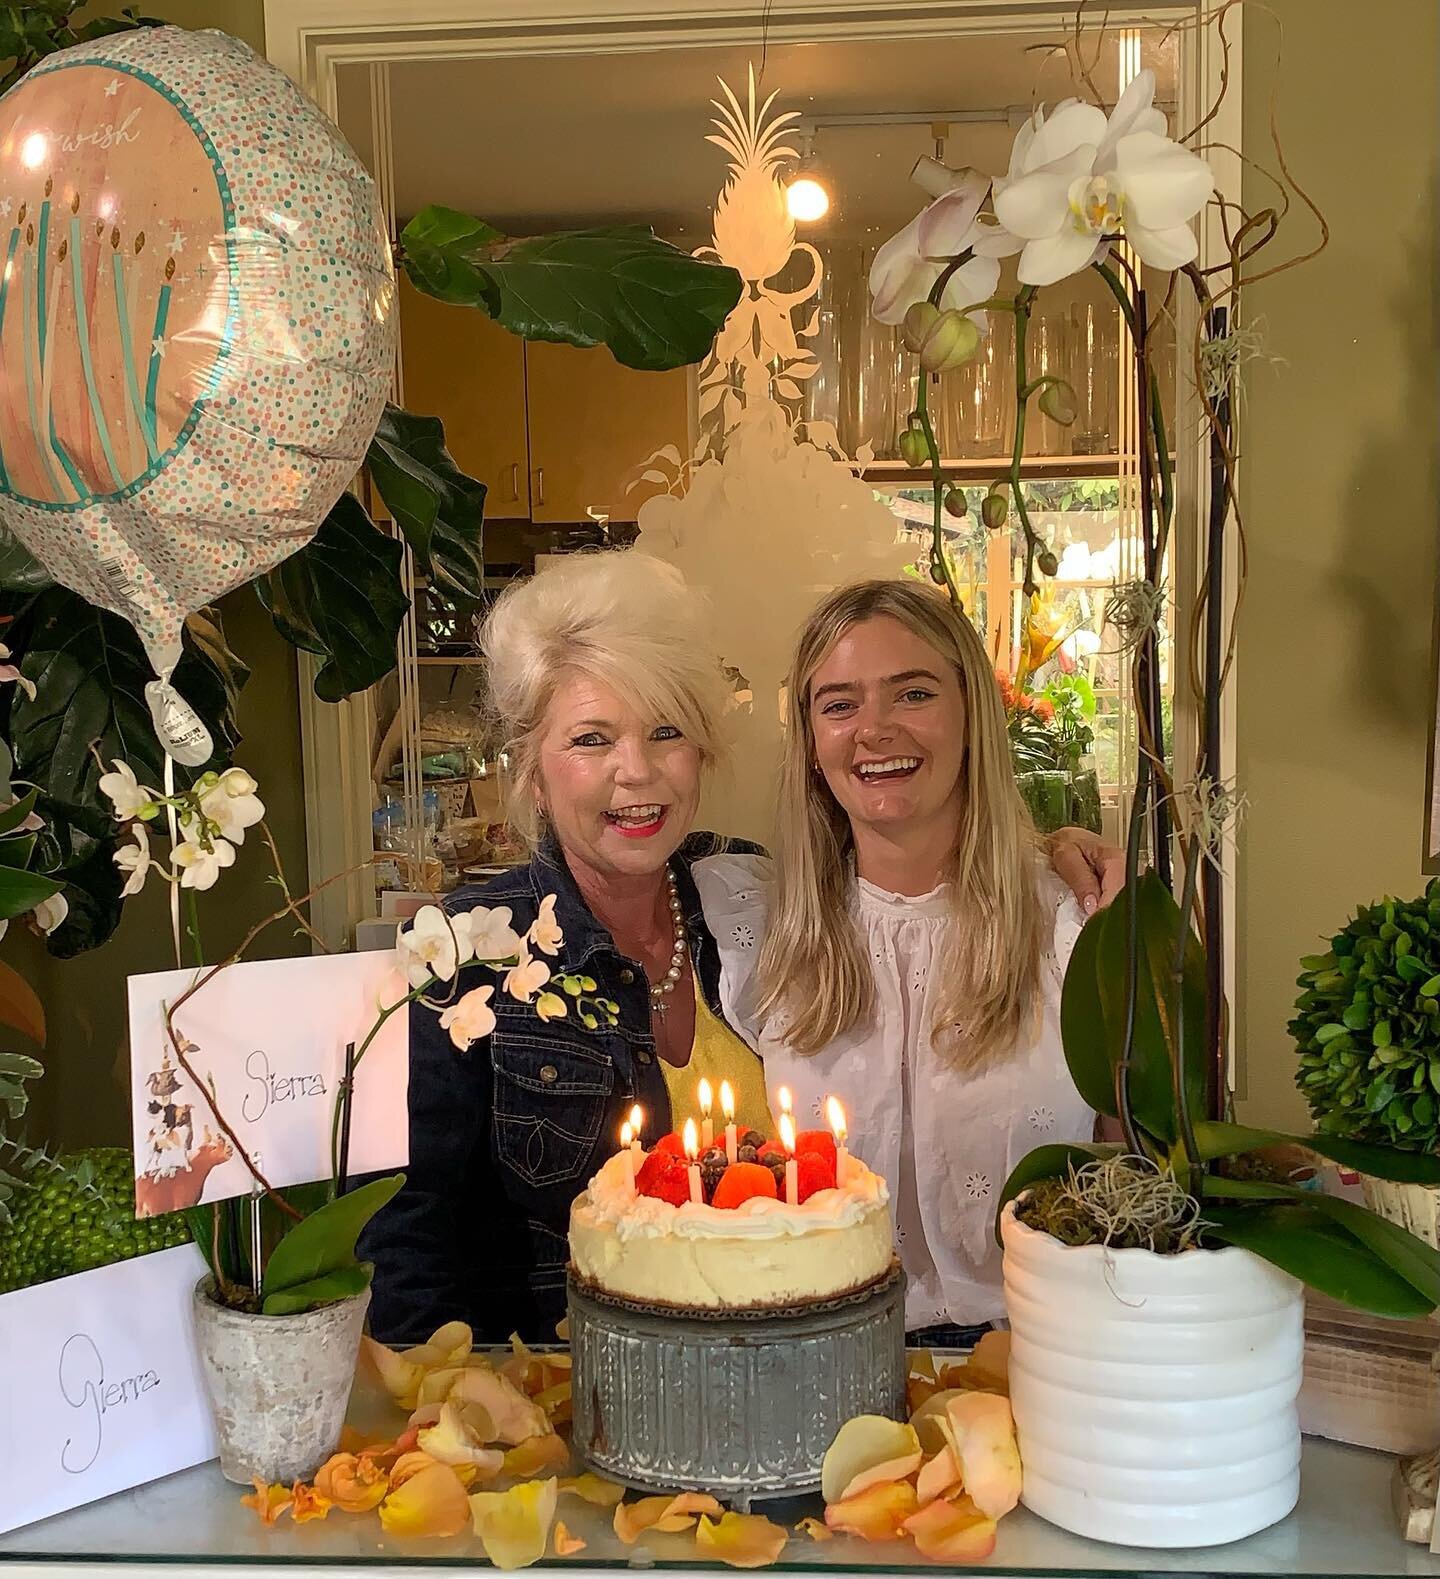 Happy Birthday Sierra! Wishing you a beautiful birthday and celebration! How lucky are we to share you on your special day! We love you! 🥳🎂🍾💗💐 
.
.
.
.
#birthdaygirl #22 #happybirthday #weloveyou #celebtate #florals #floraldesigner #montecito #s